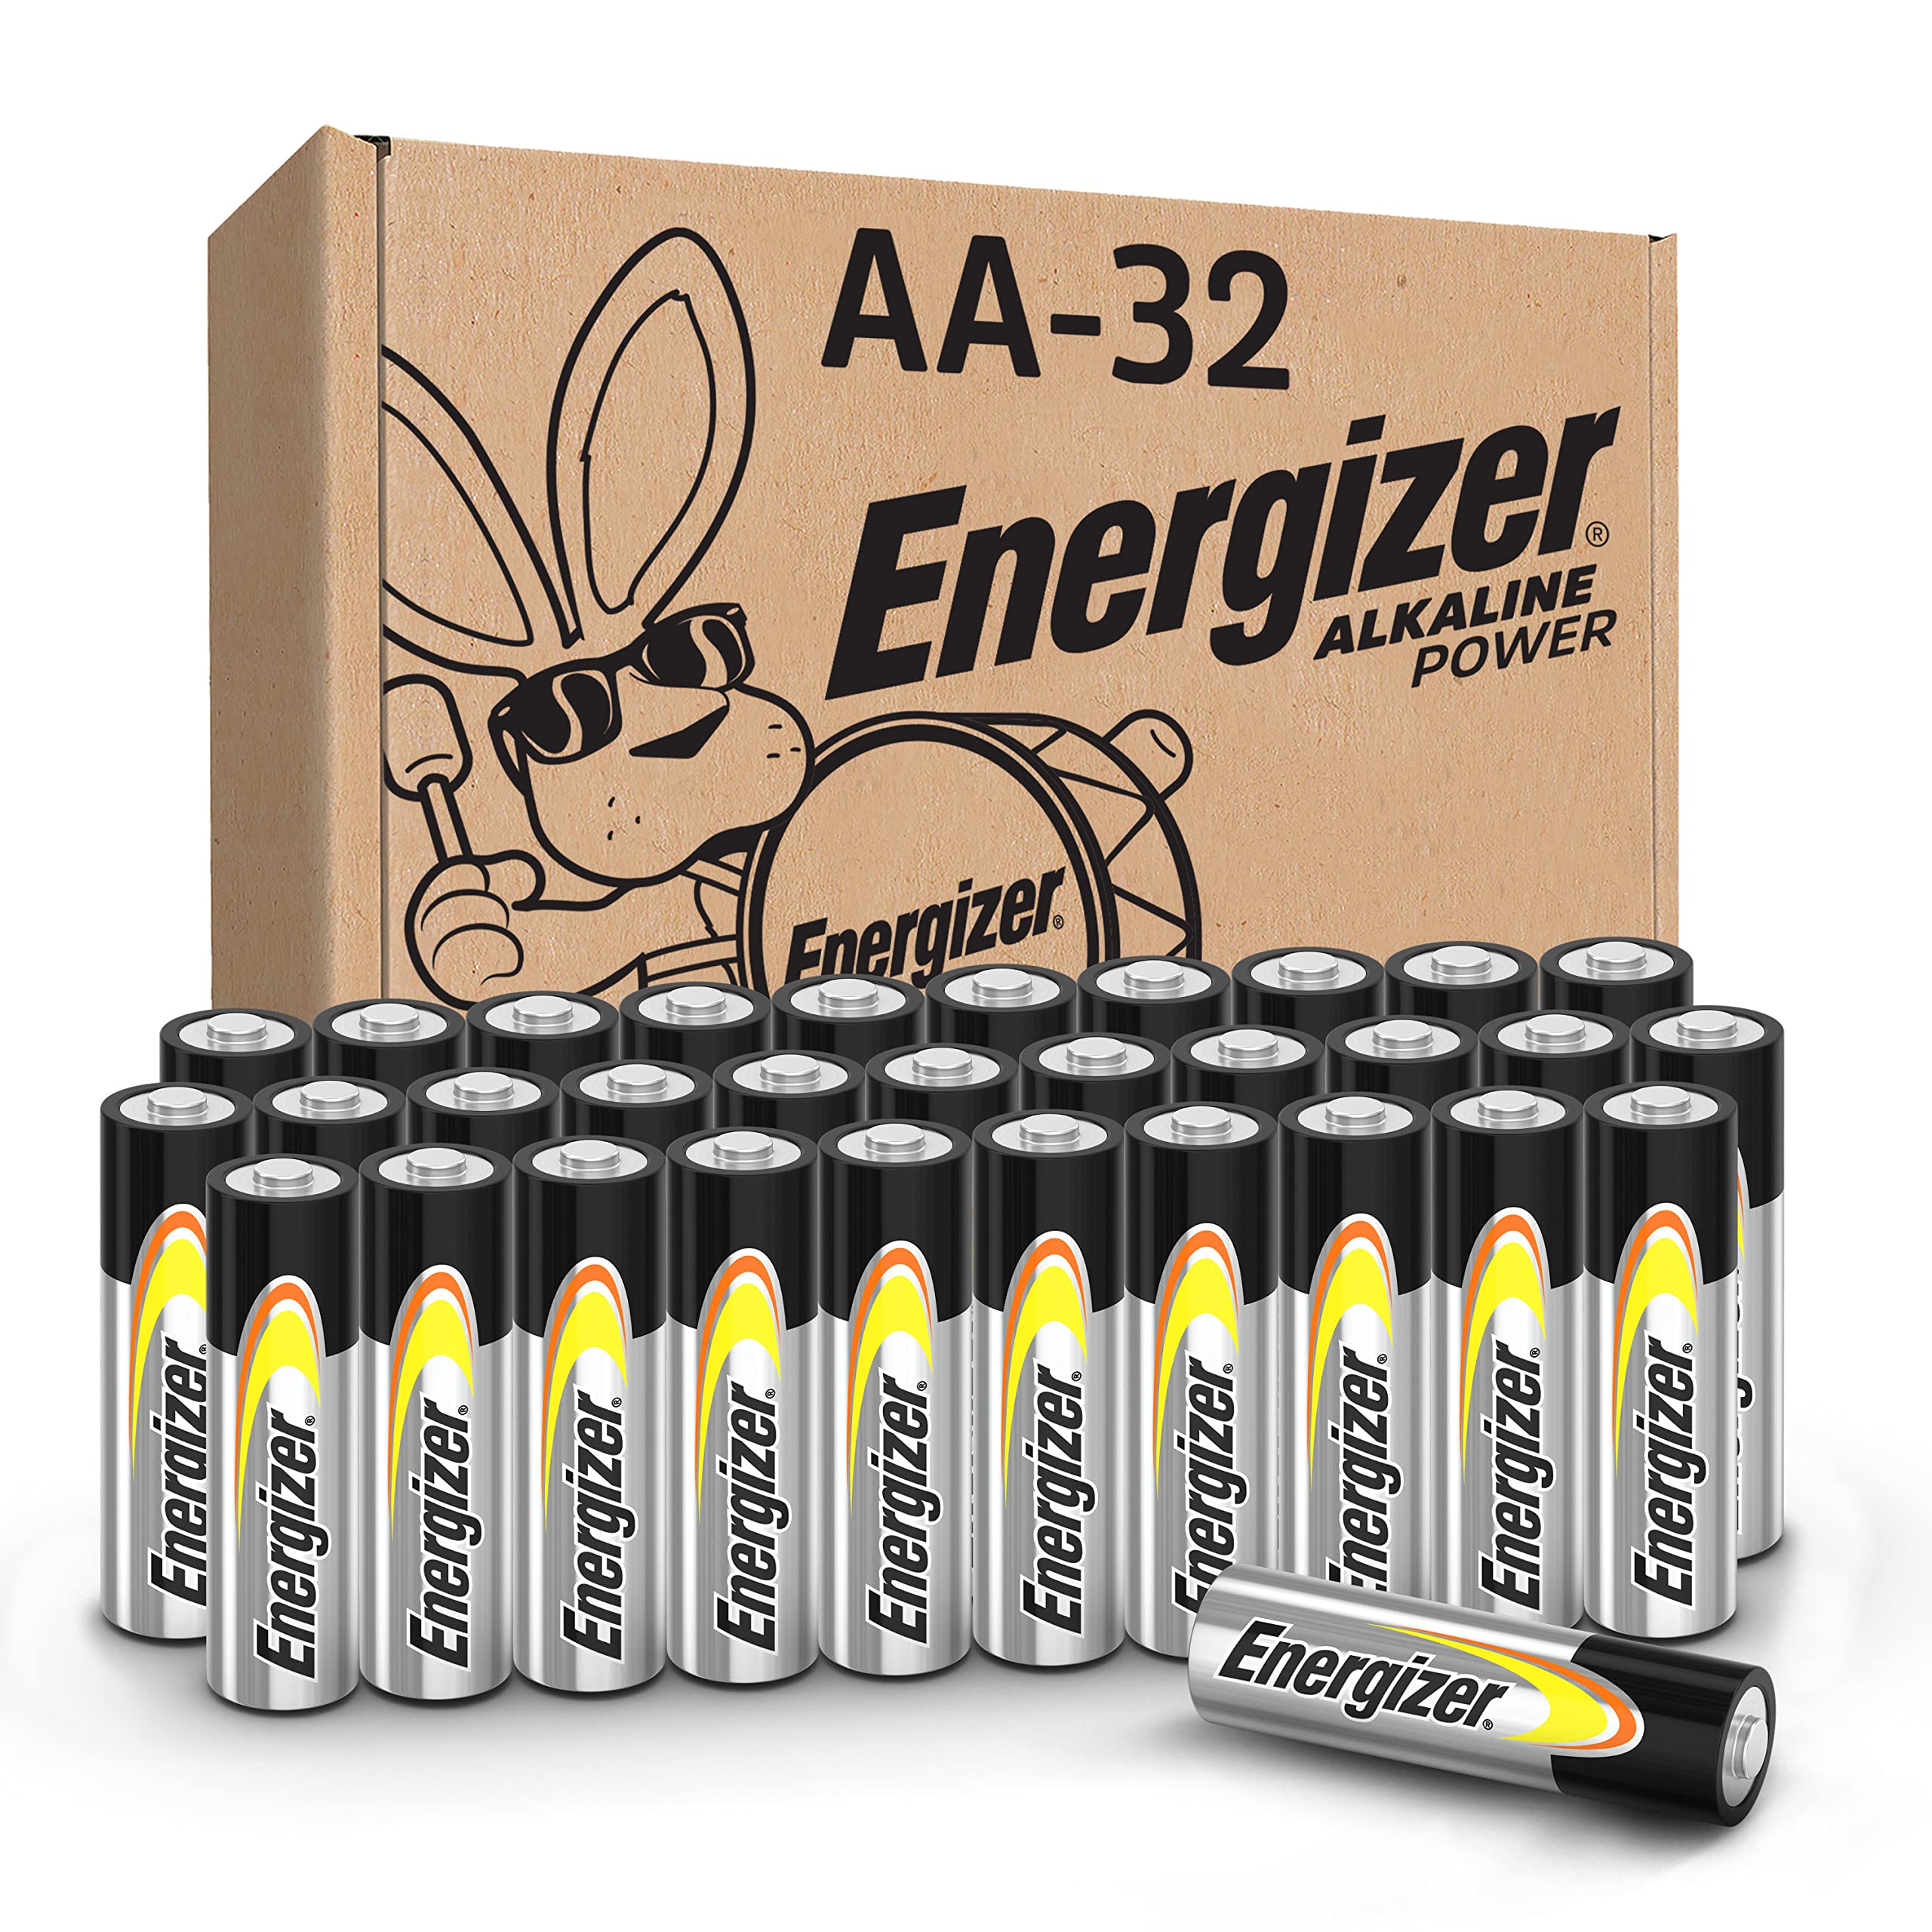 Energizer AA Batteries, Double A Long-Lasting Alkaline Power Batteries, 32 Count (Pack of 1) $14